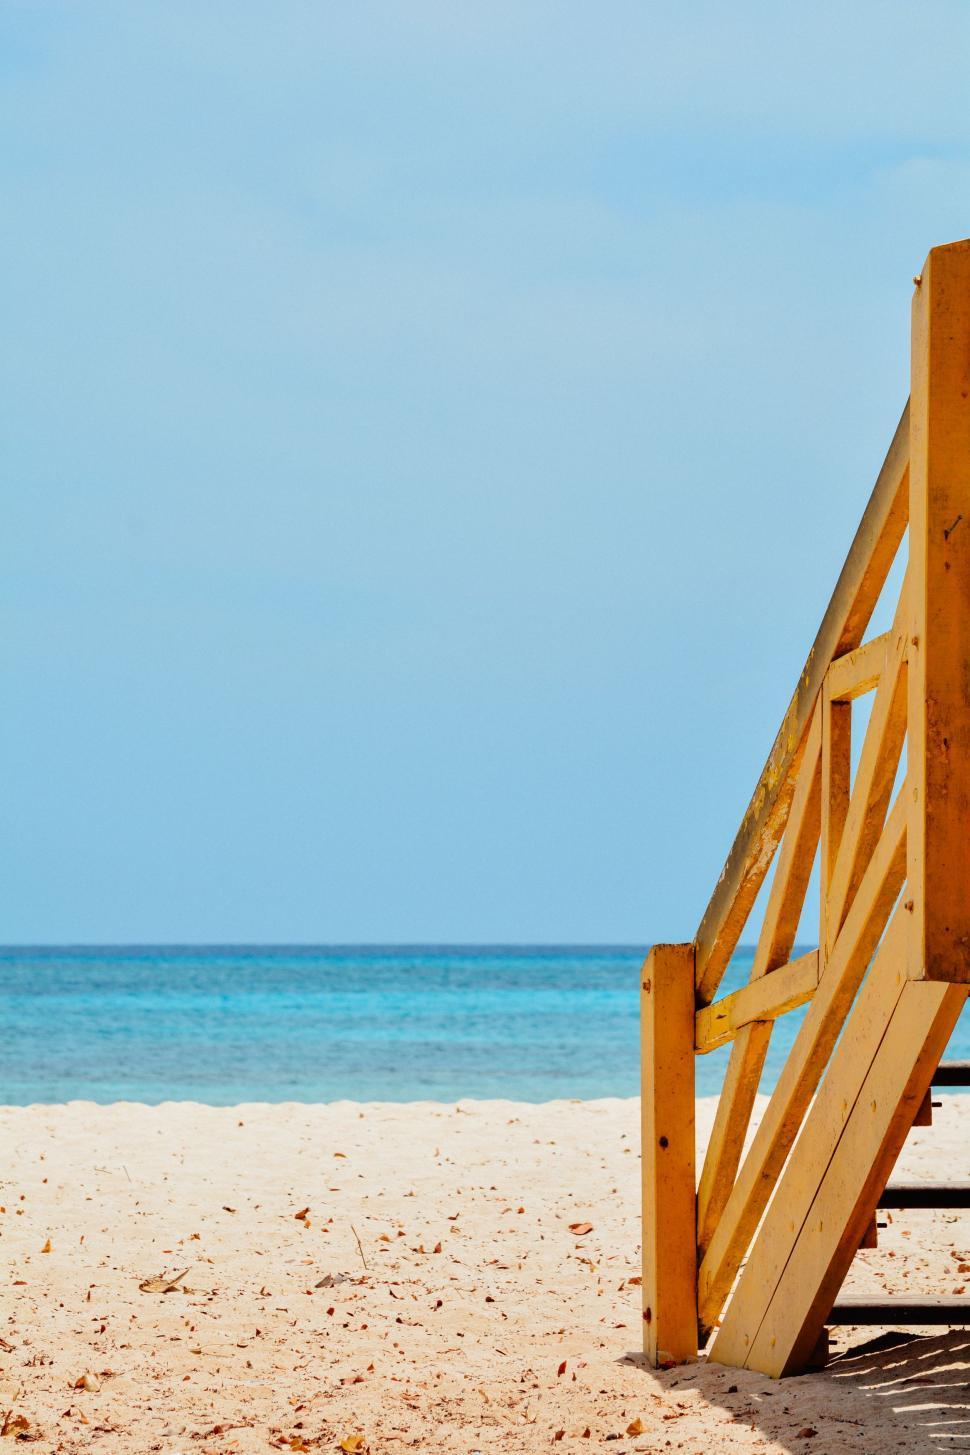 Free Image of Lifeguard Stand and Ocean View 